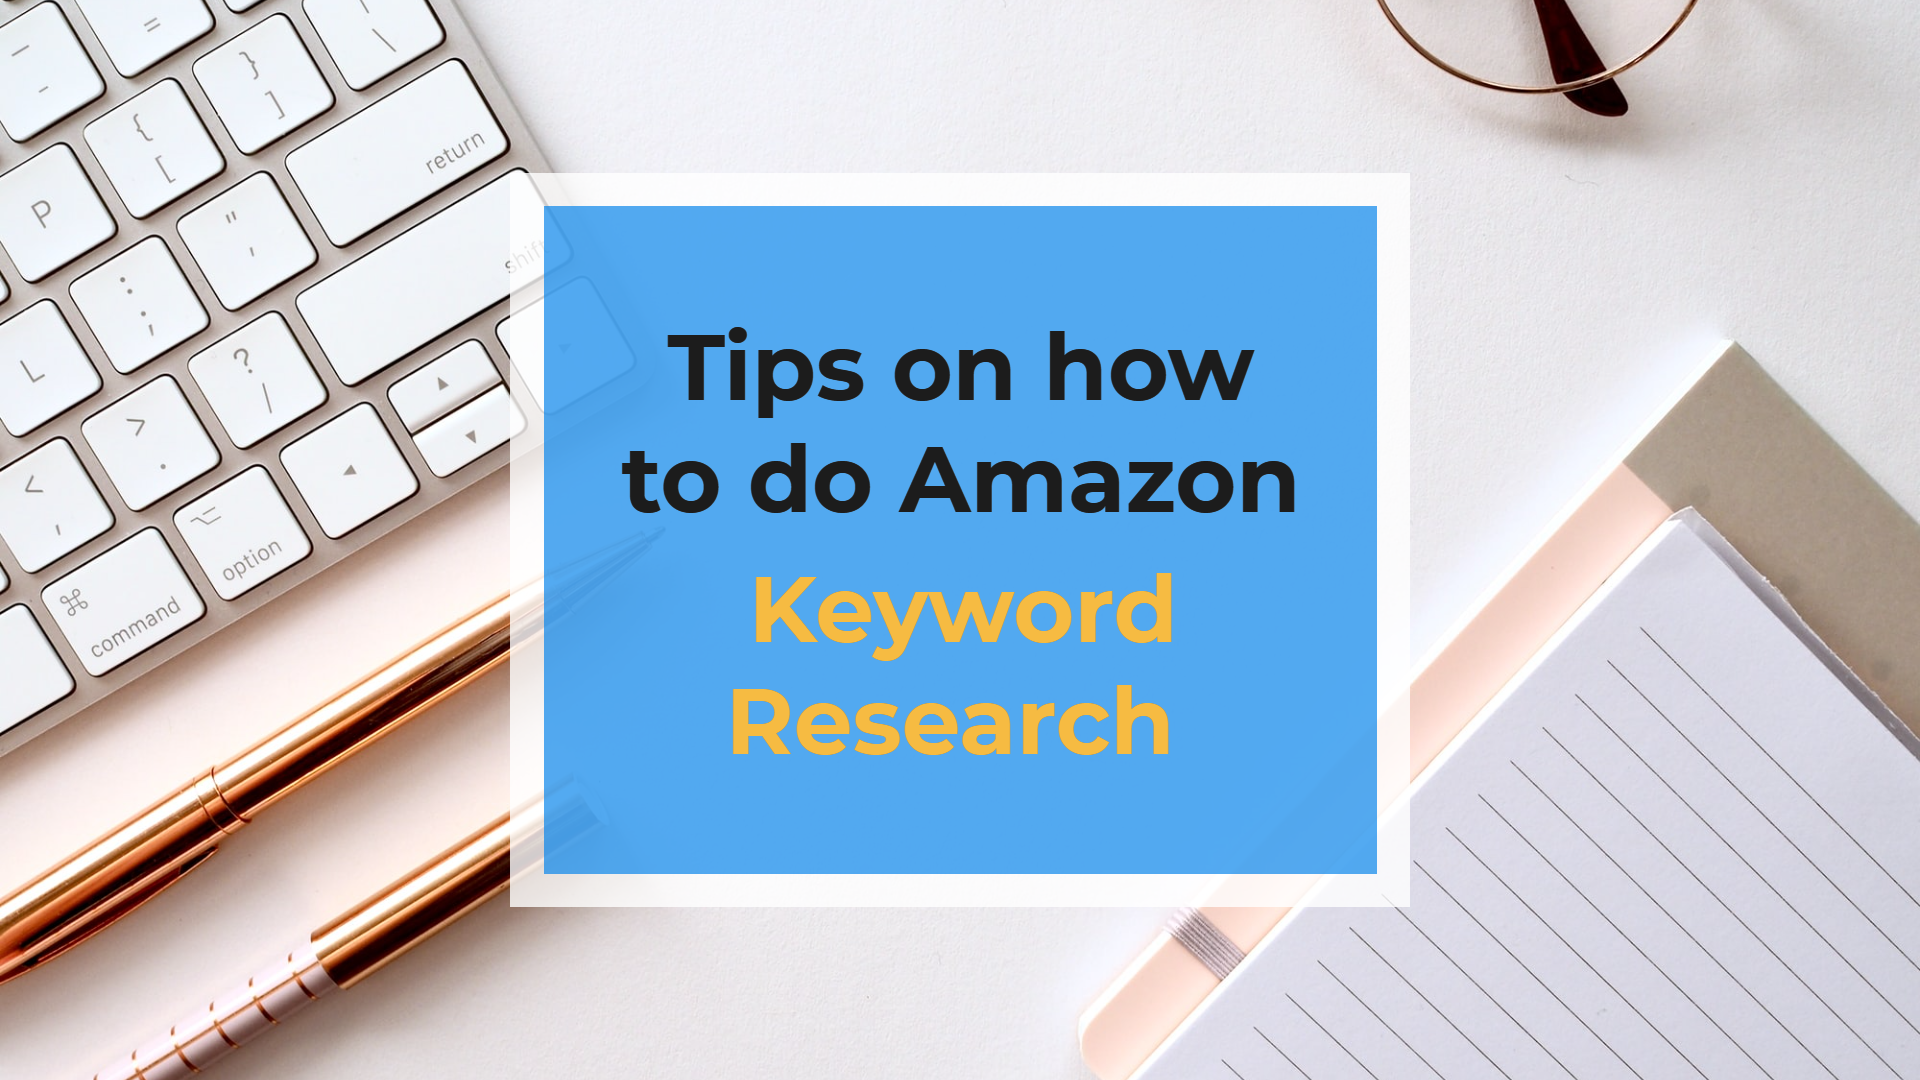 Tips on how to do Amazon Keyword Research